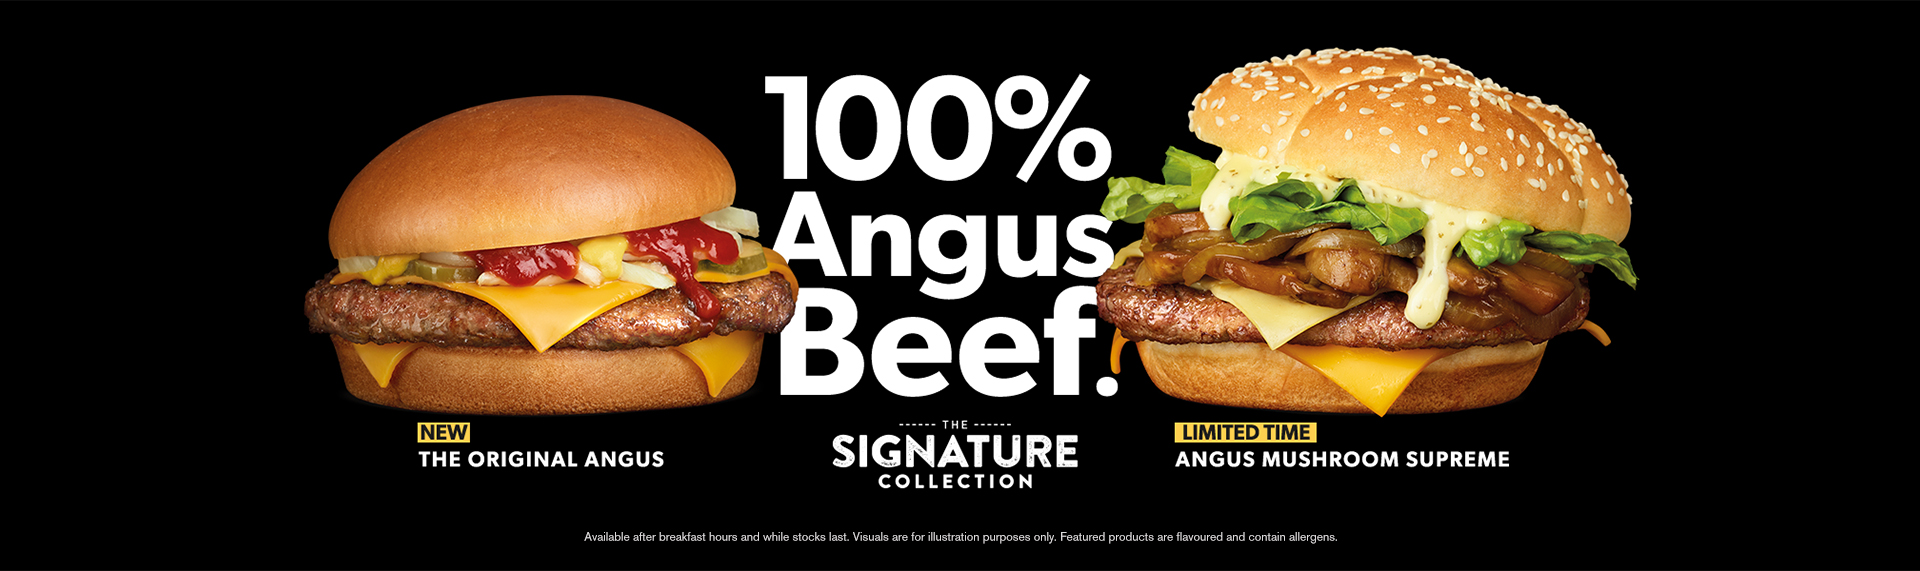 McDonalds Real Beef Advertising Campaign